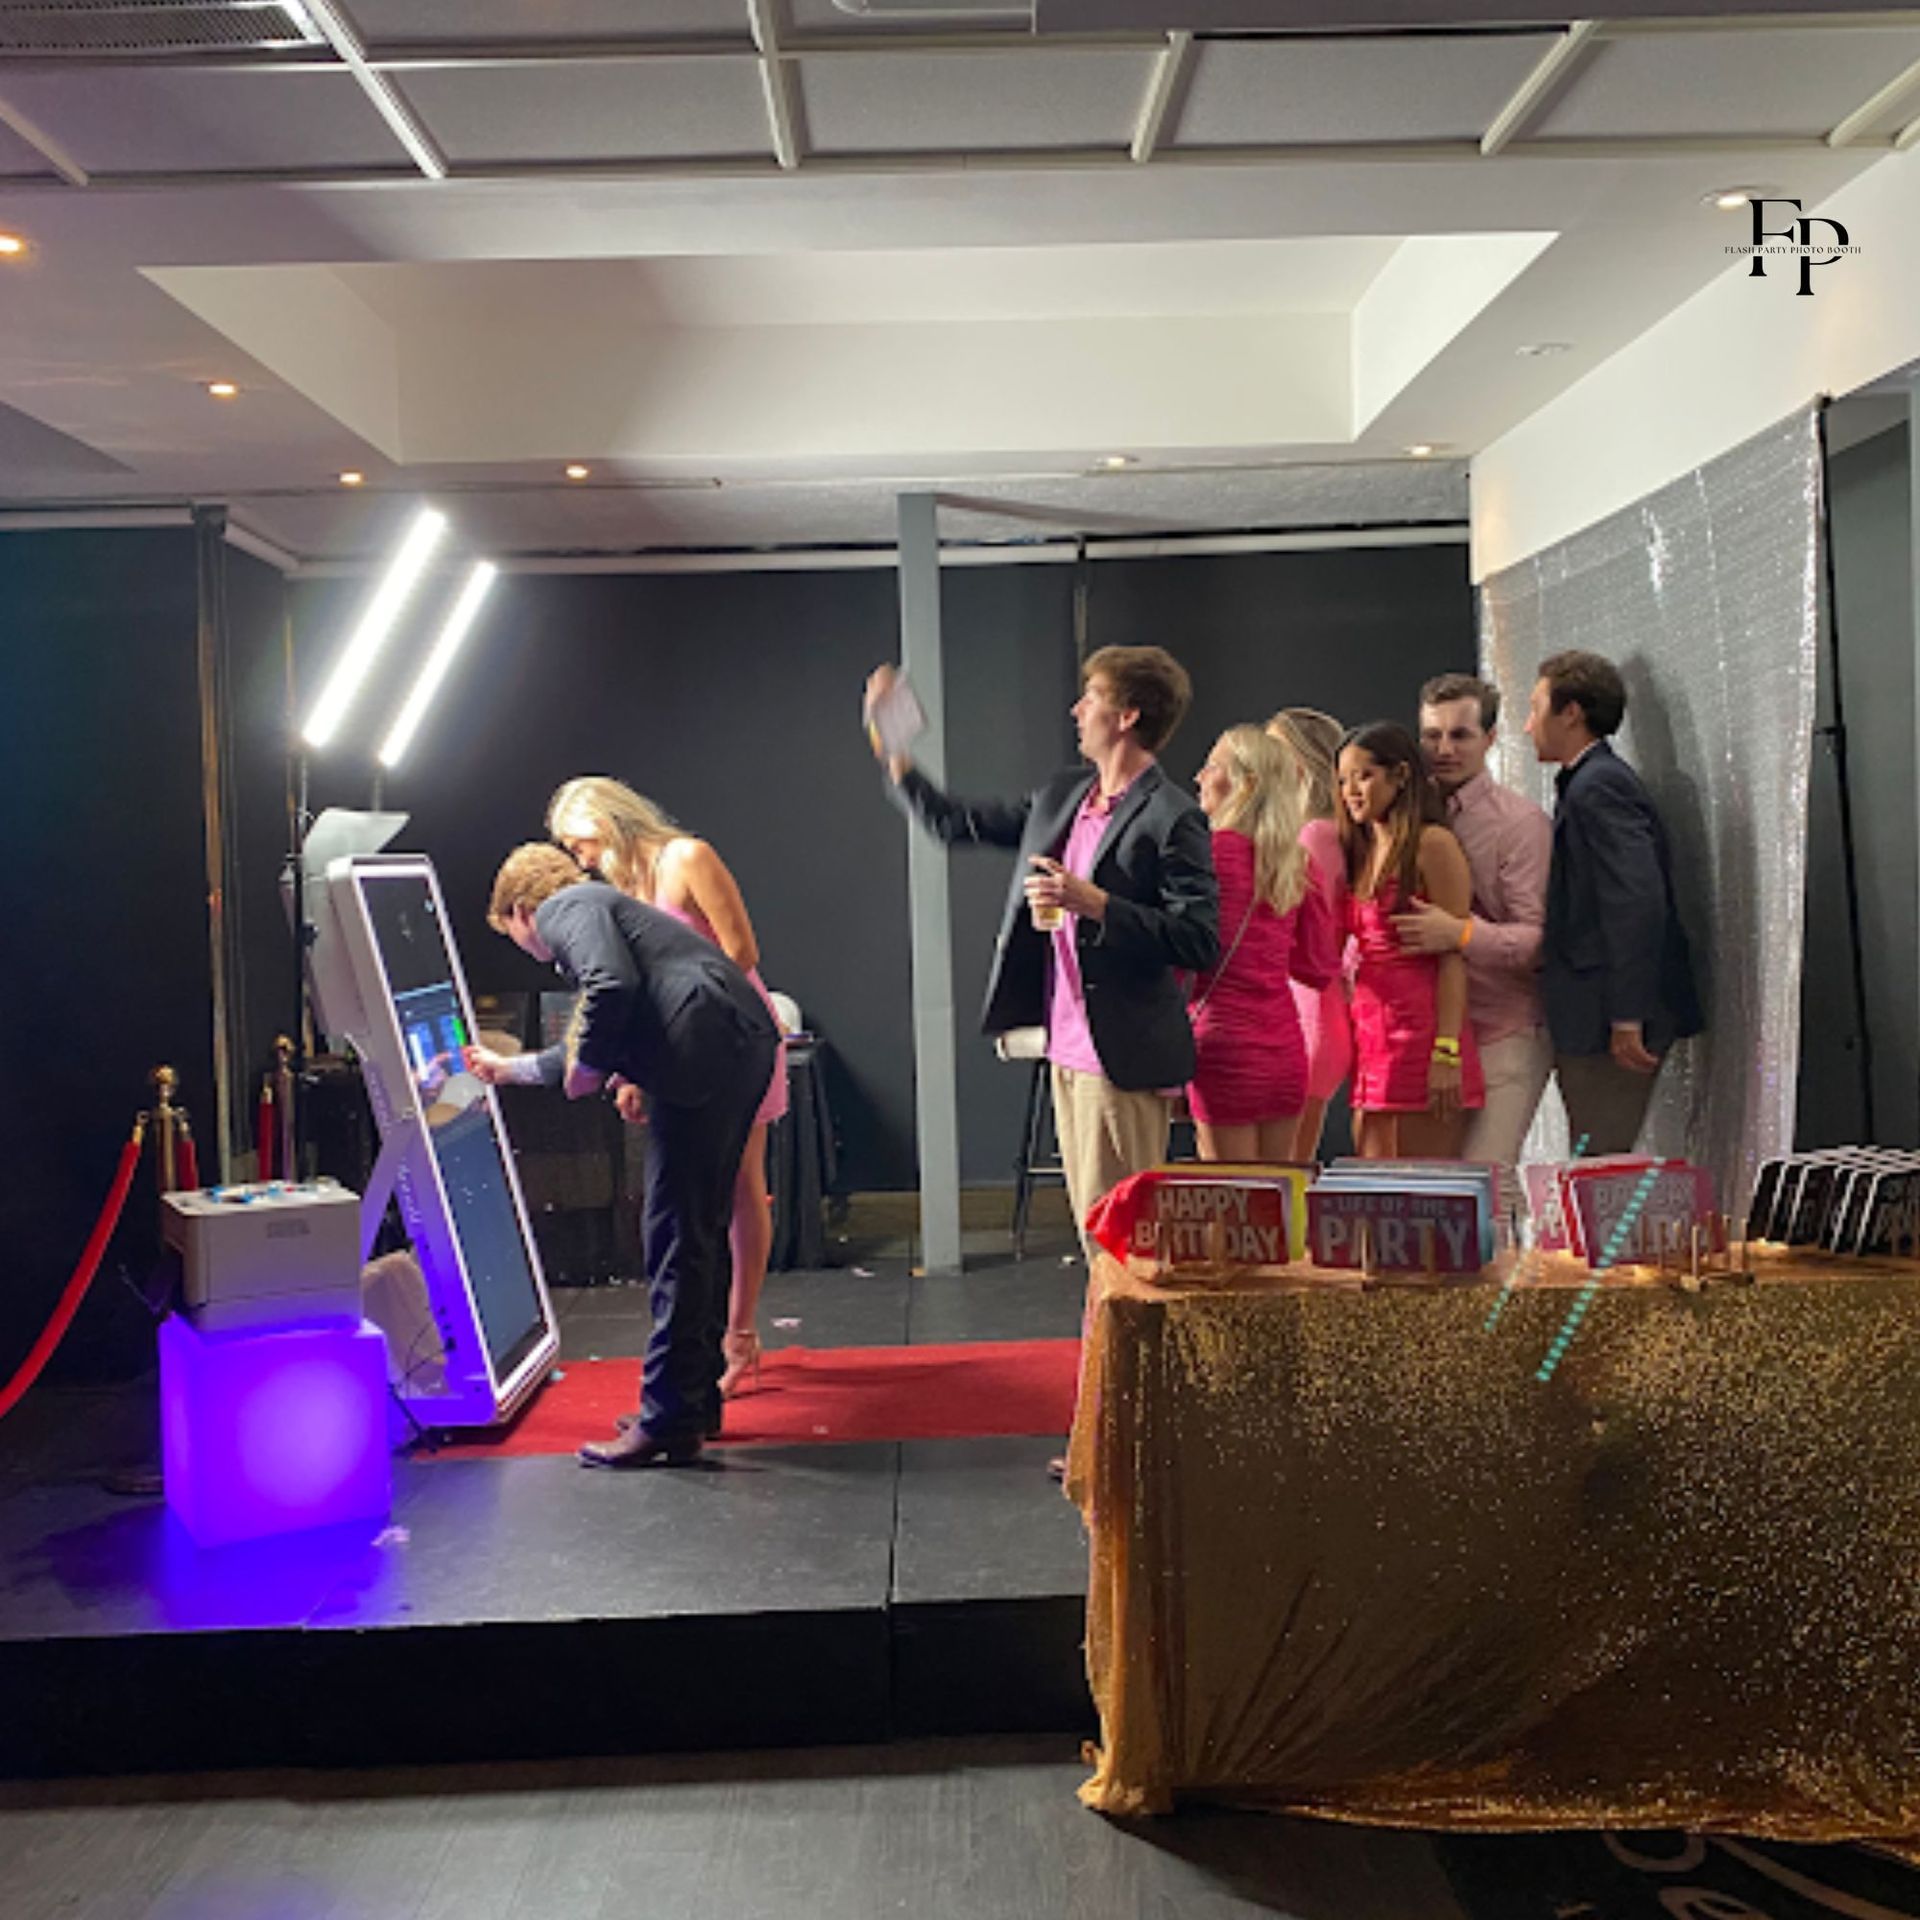 Guests enjoy the Mirror Photo Booth at a corporate event.